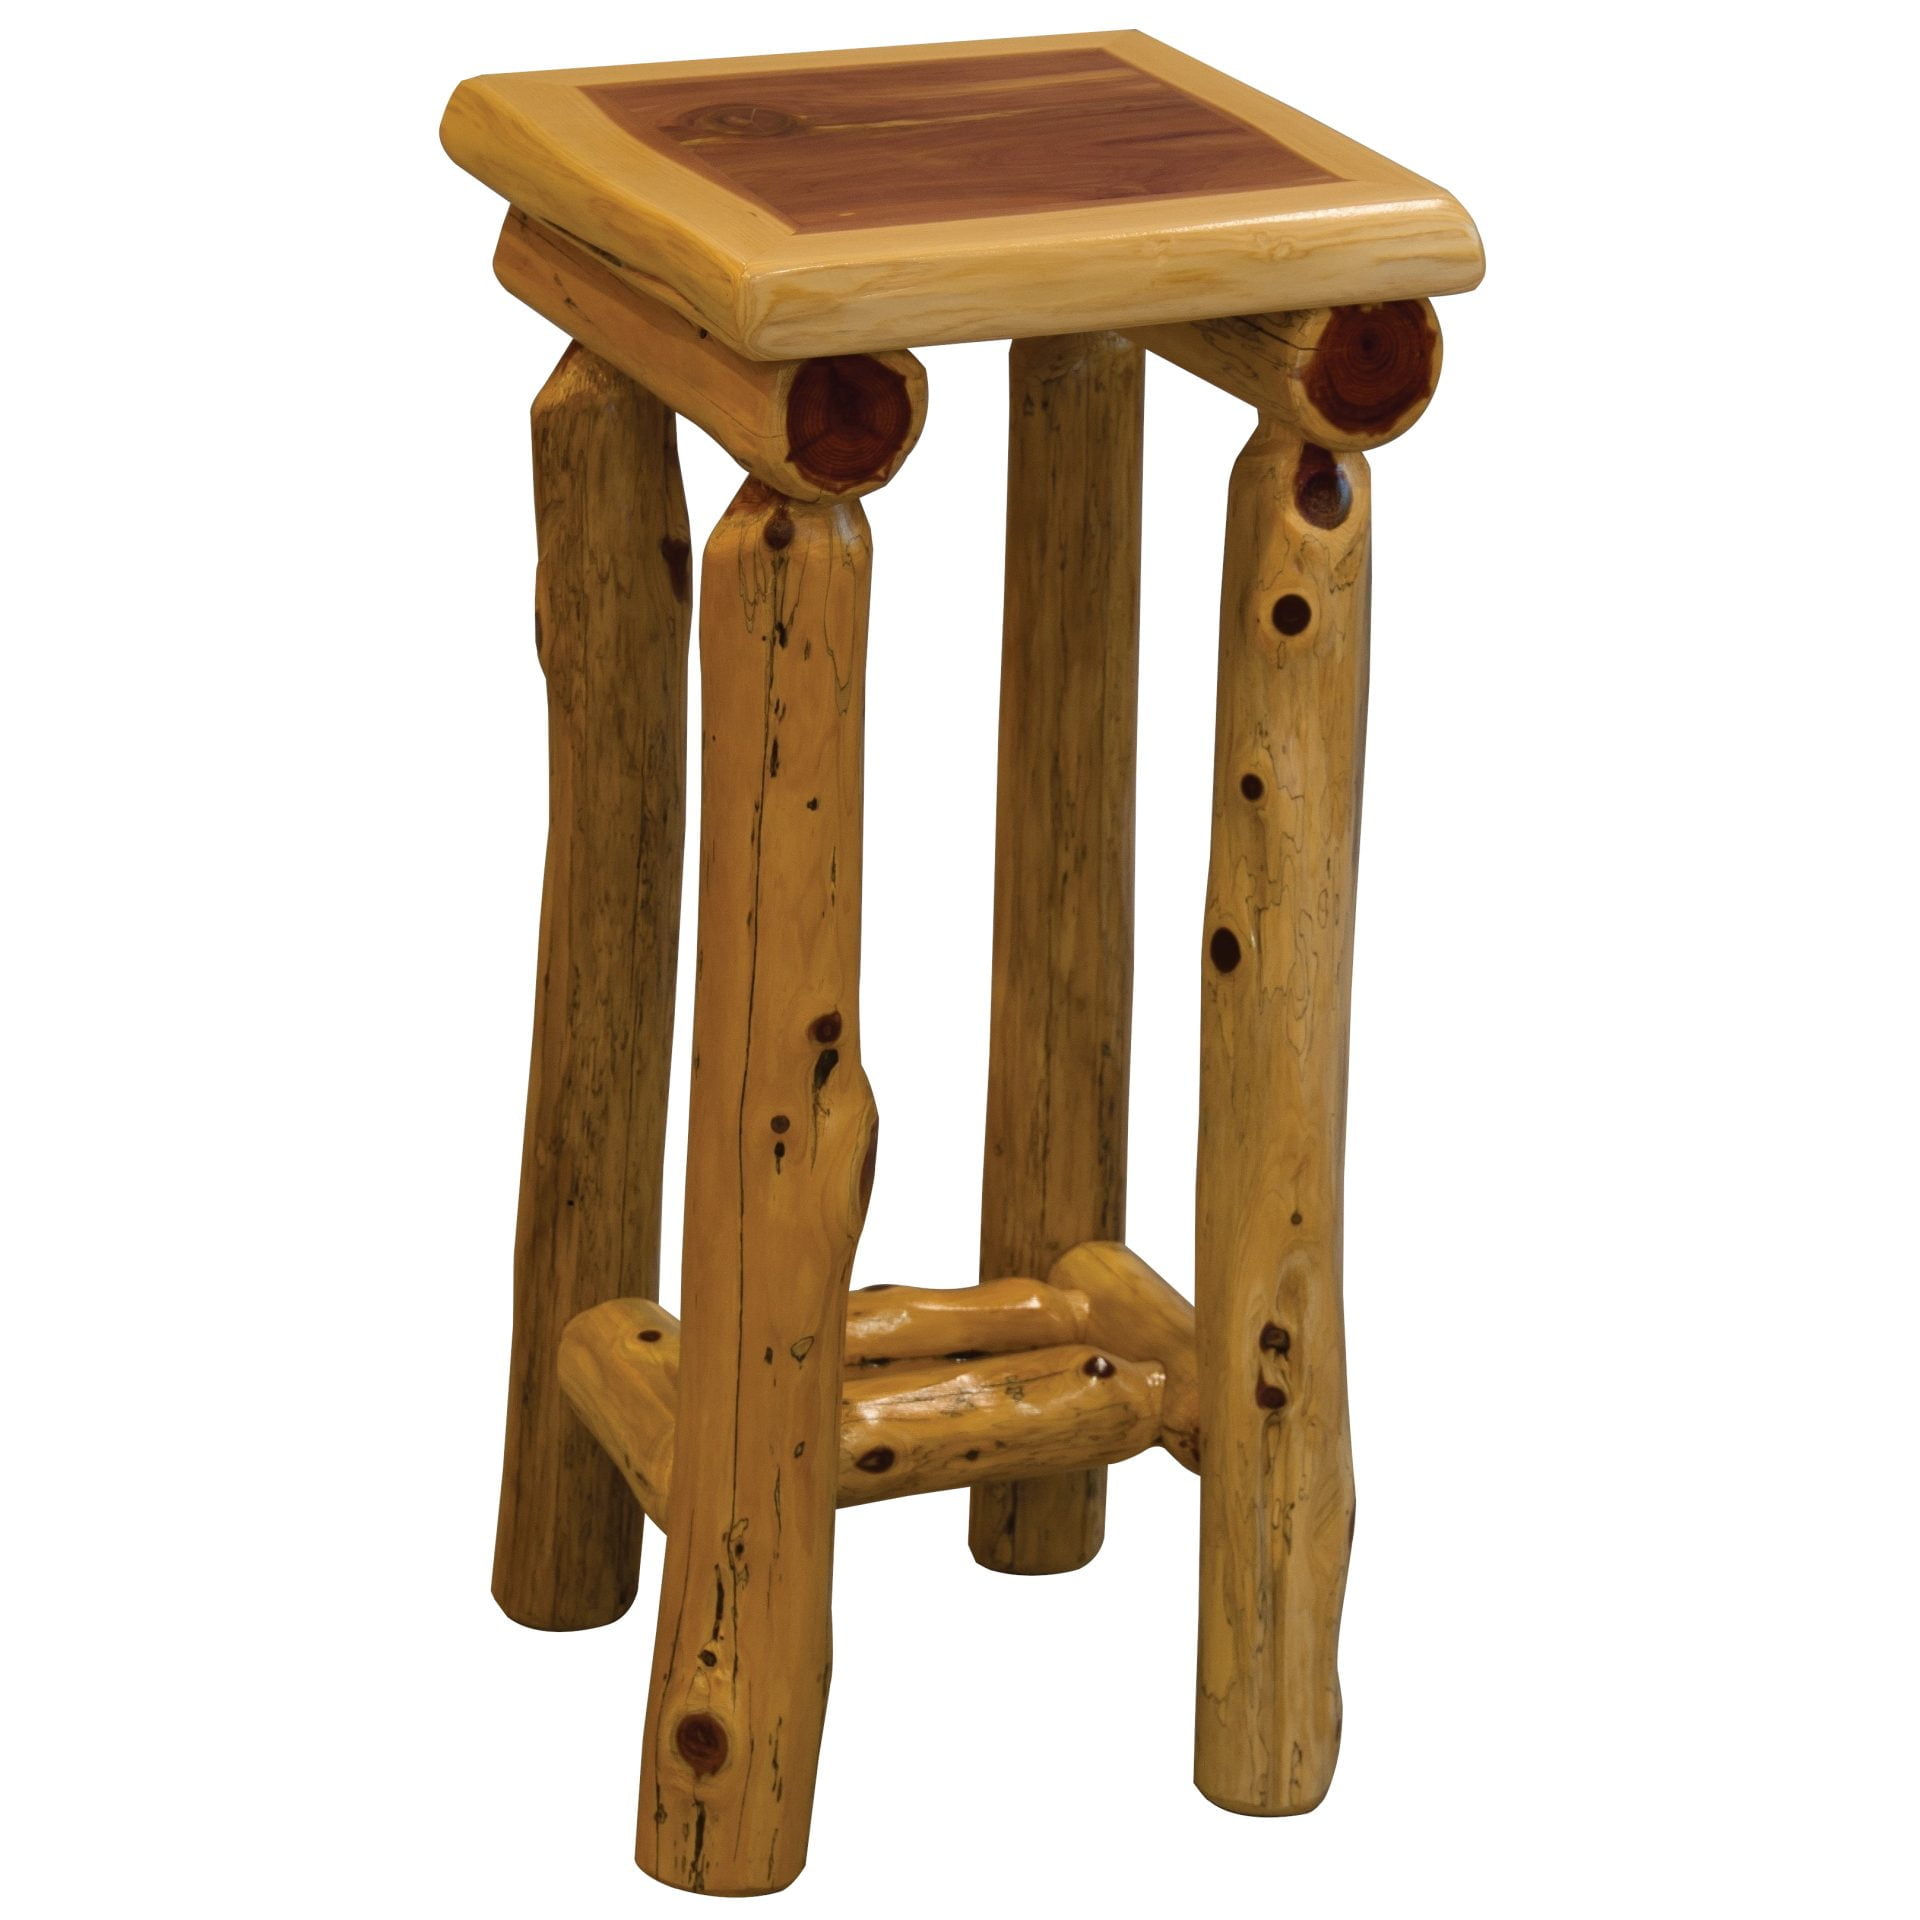 Rustic Red Cedar Log Small End Table